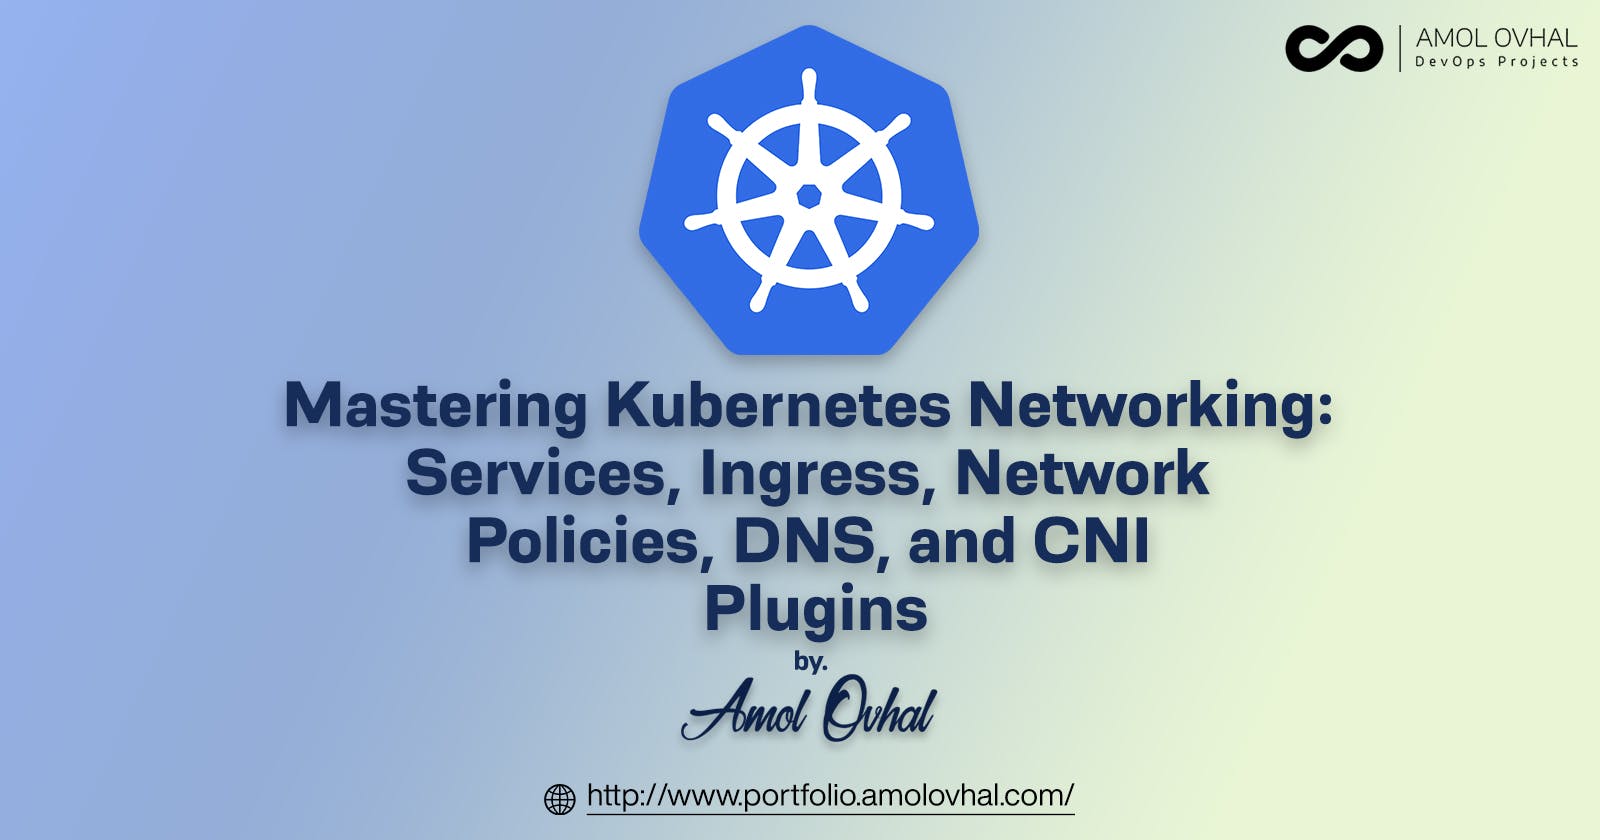 Mastering Kubernetes Networking: Services, Ingress, Network Policies, DNS, and CNI Plugins